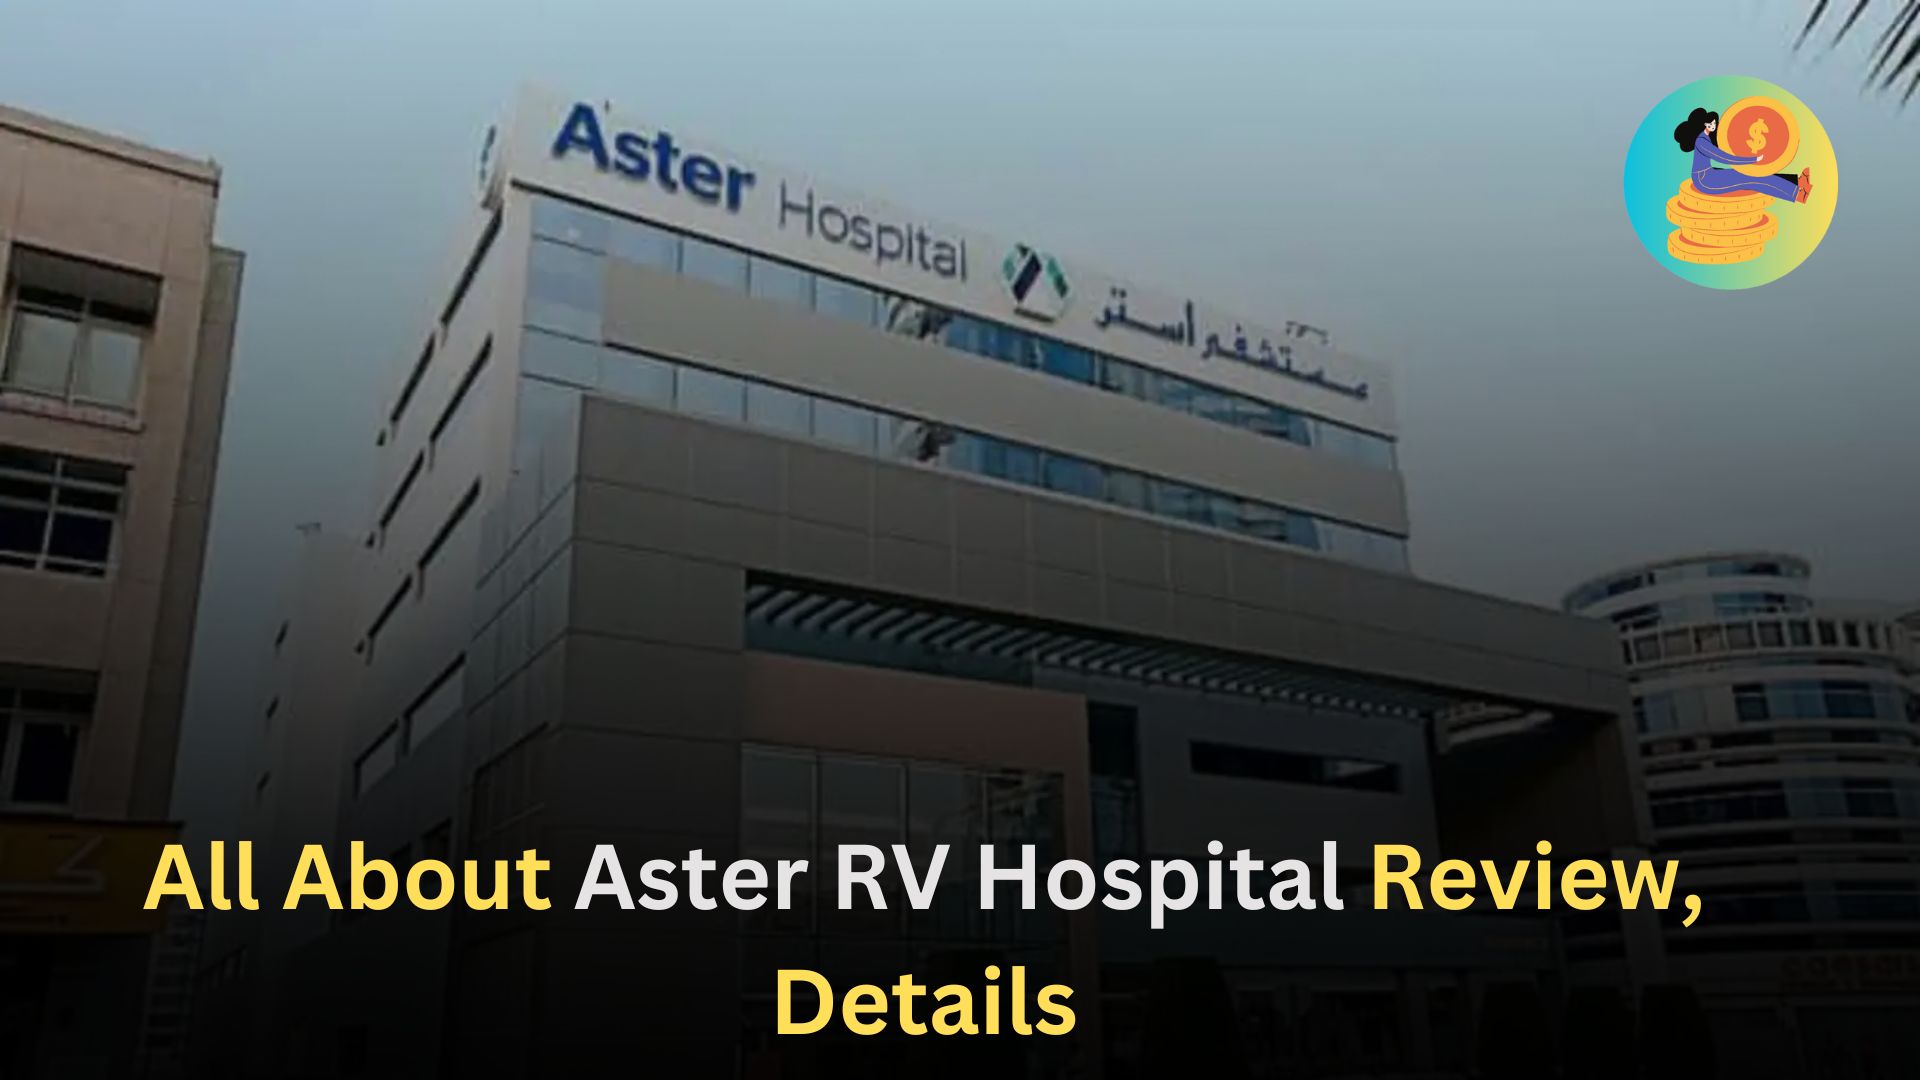 All About Aster RV Hospital Review, Details